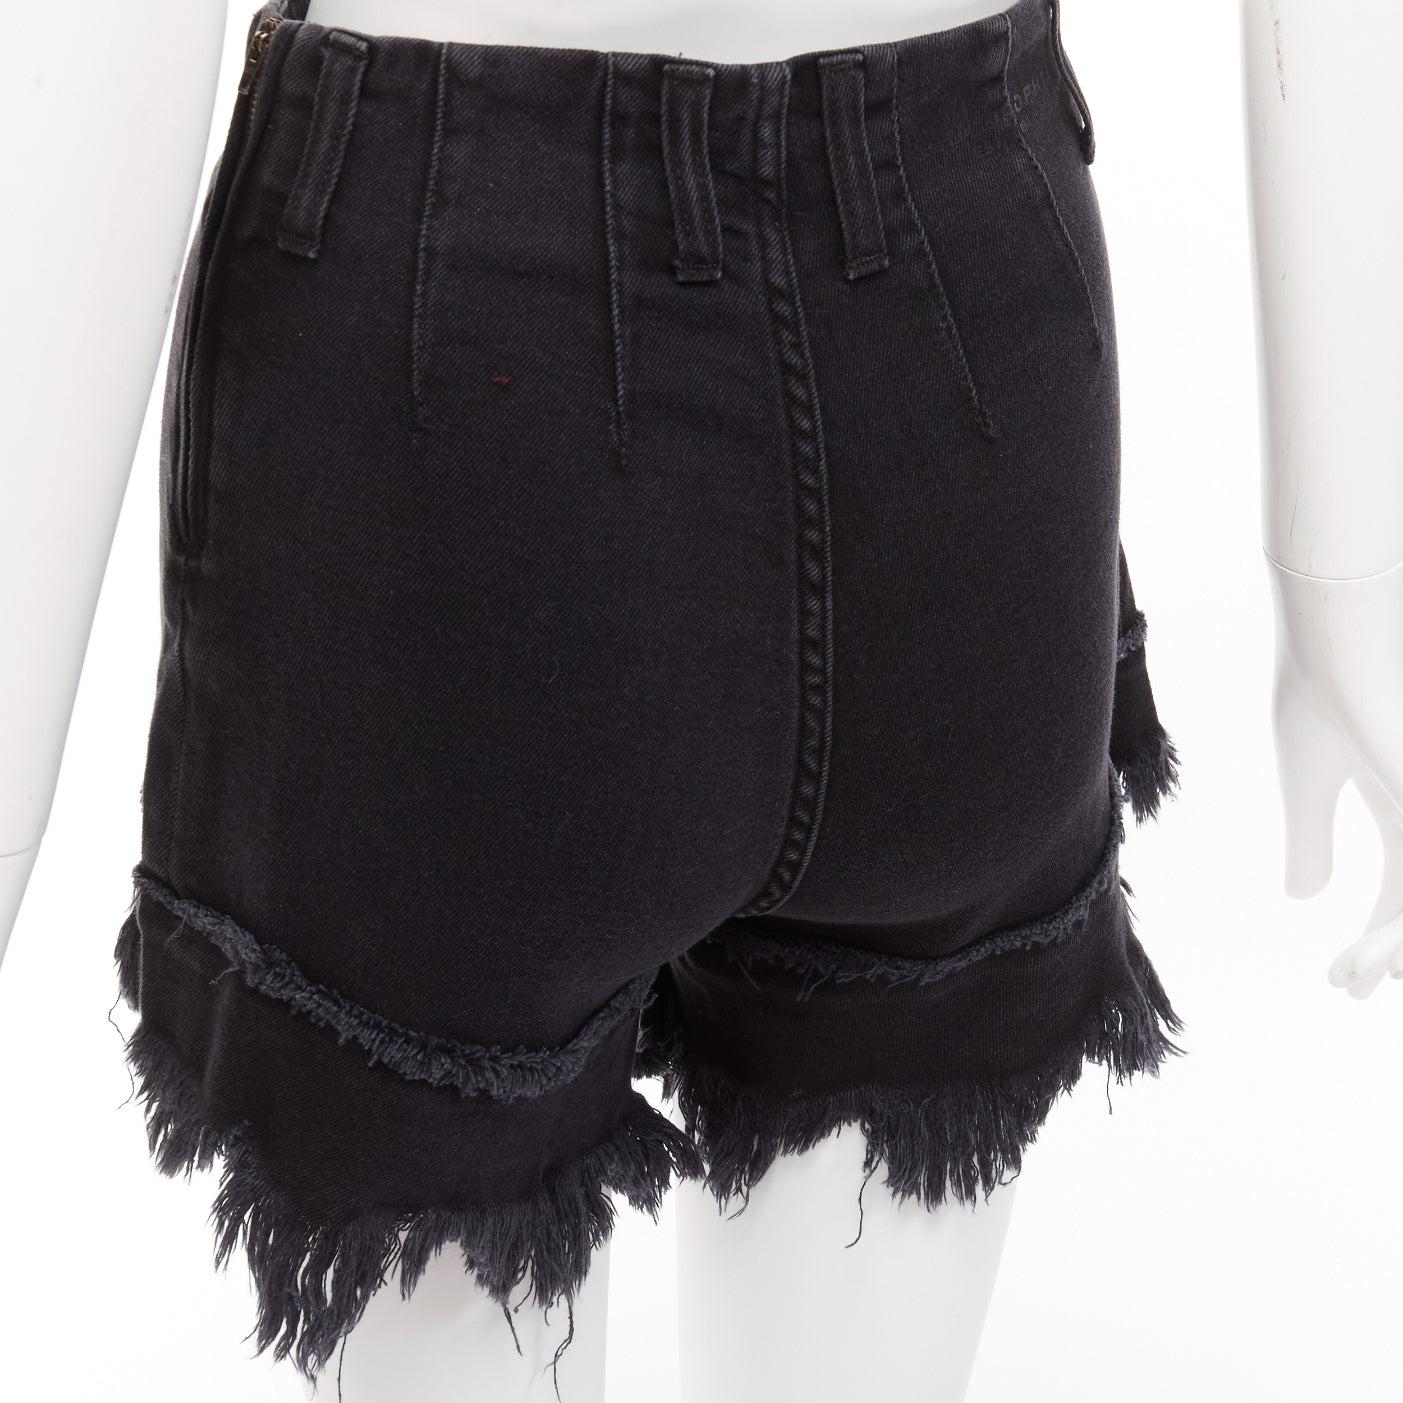 PHILOSOPHY black cotton blend high waist frayed hem flutter shorts IT38 XS
Reference: AAWC/A00861
Brand: Philosophy
Material: Cotton, Blend
Color: Black
Pattern: Solid
Closure: Zip
Lining: Black Fabric
Extra Details: Side zip. Back darts.
Made in: